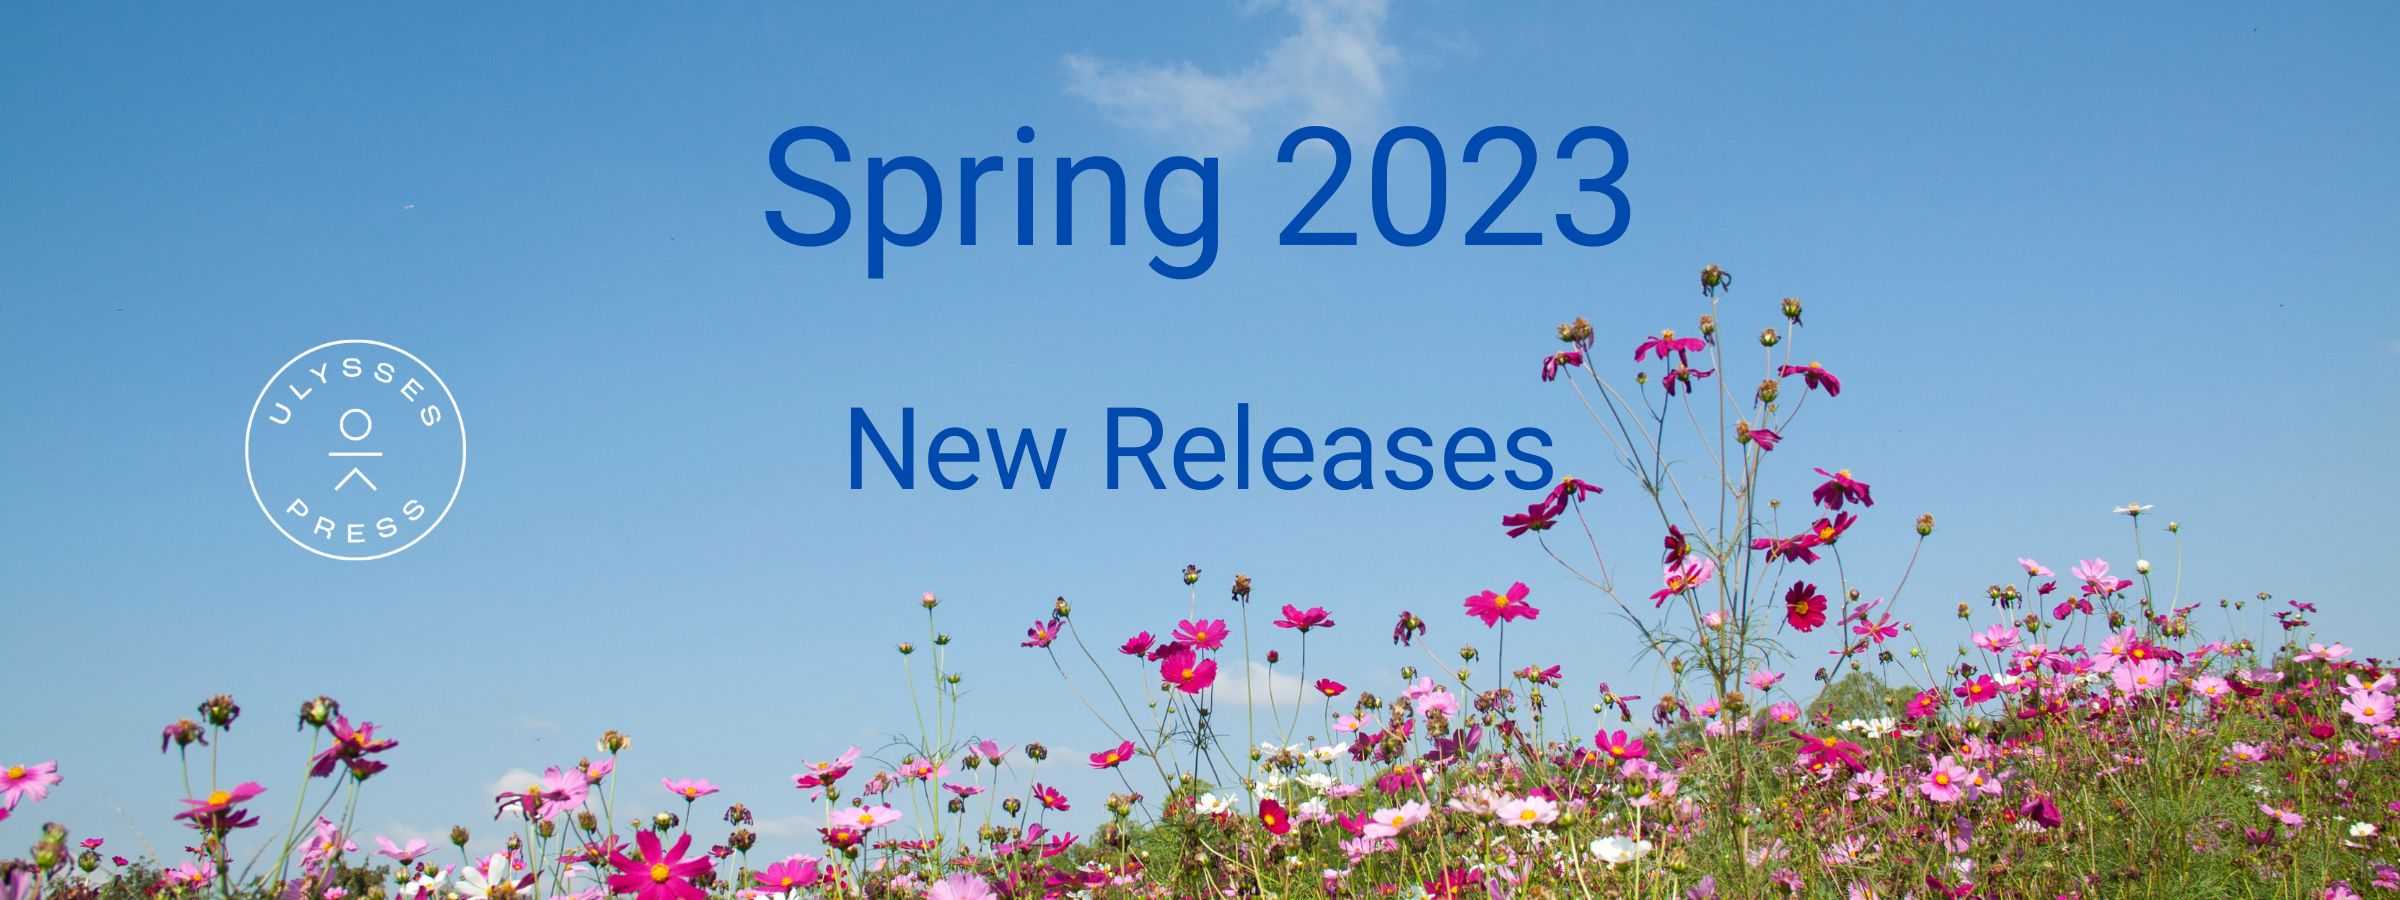 New Releases Spring 2023